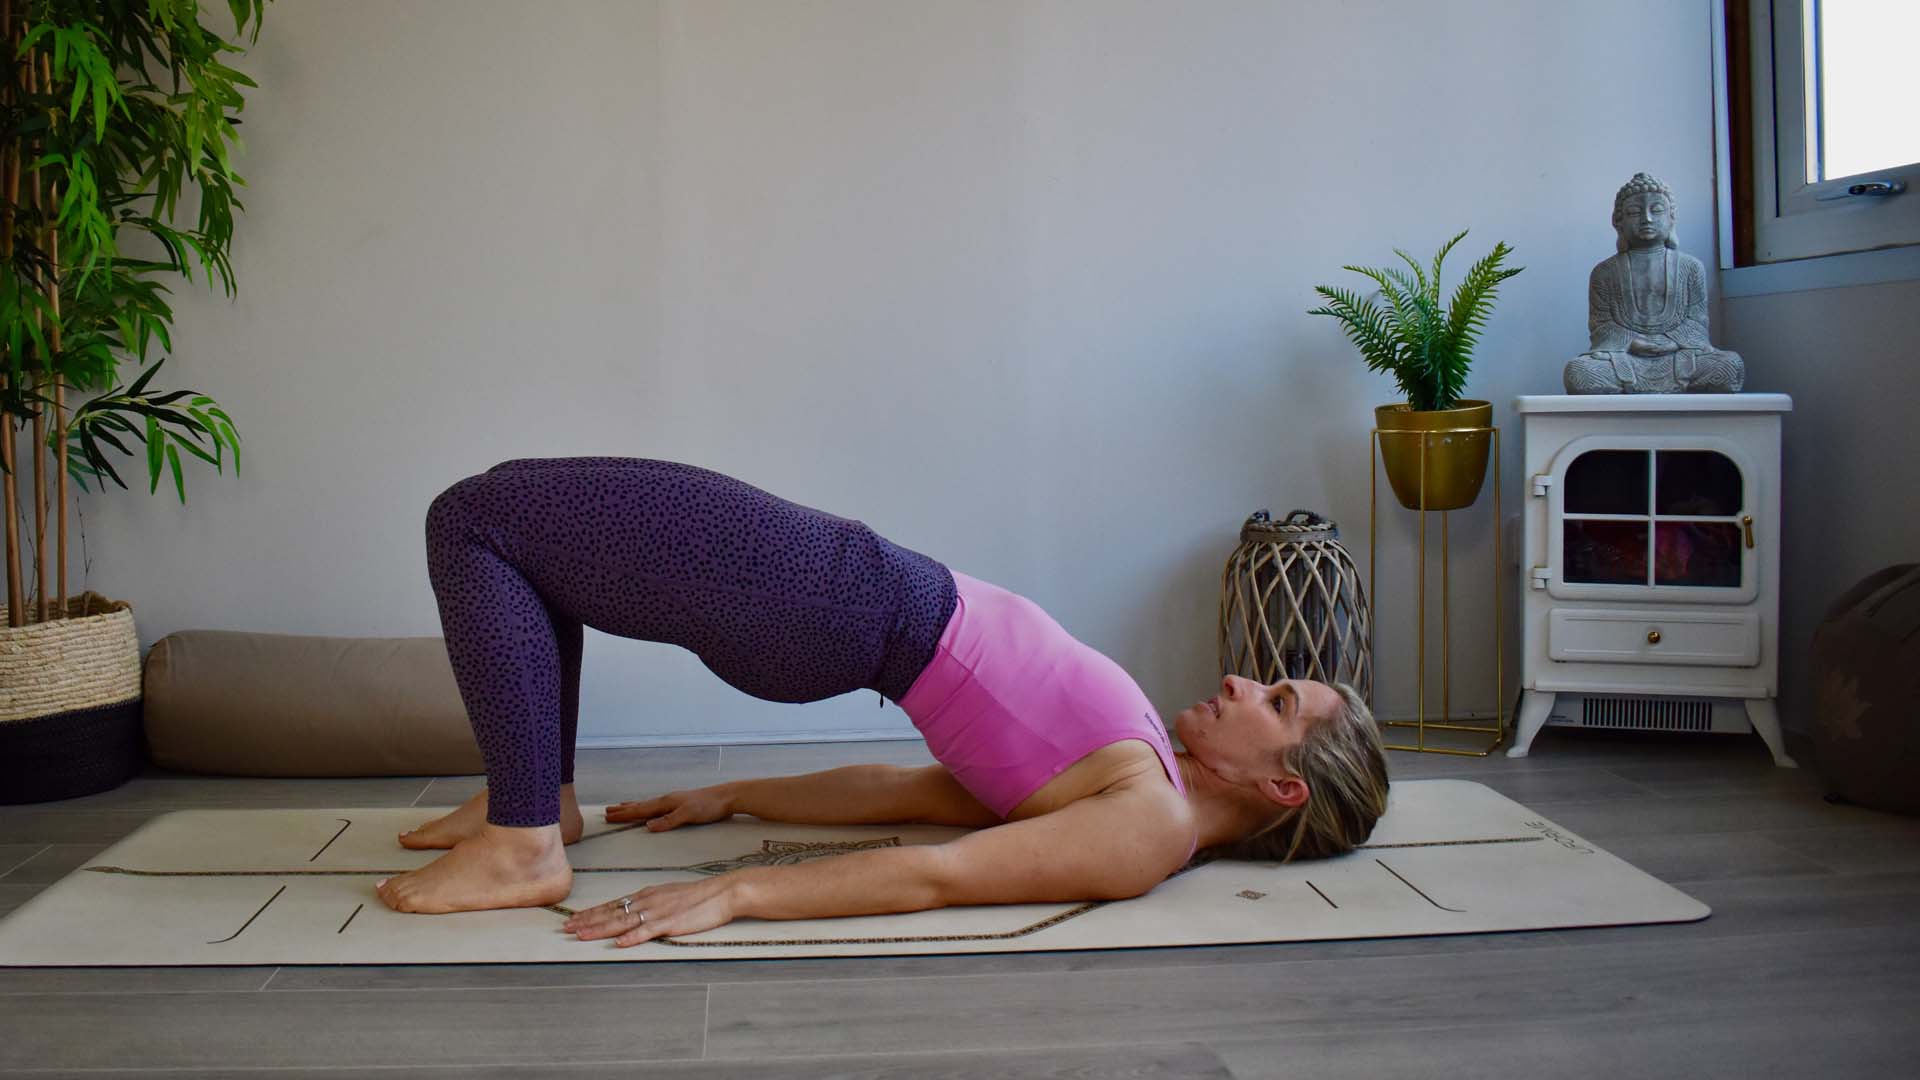 A woman on a yoga mat in Bridge posture illustrating one of the best beginner yoga poses